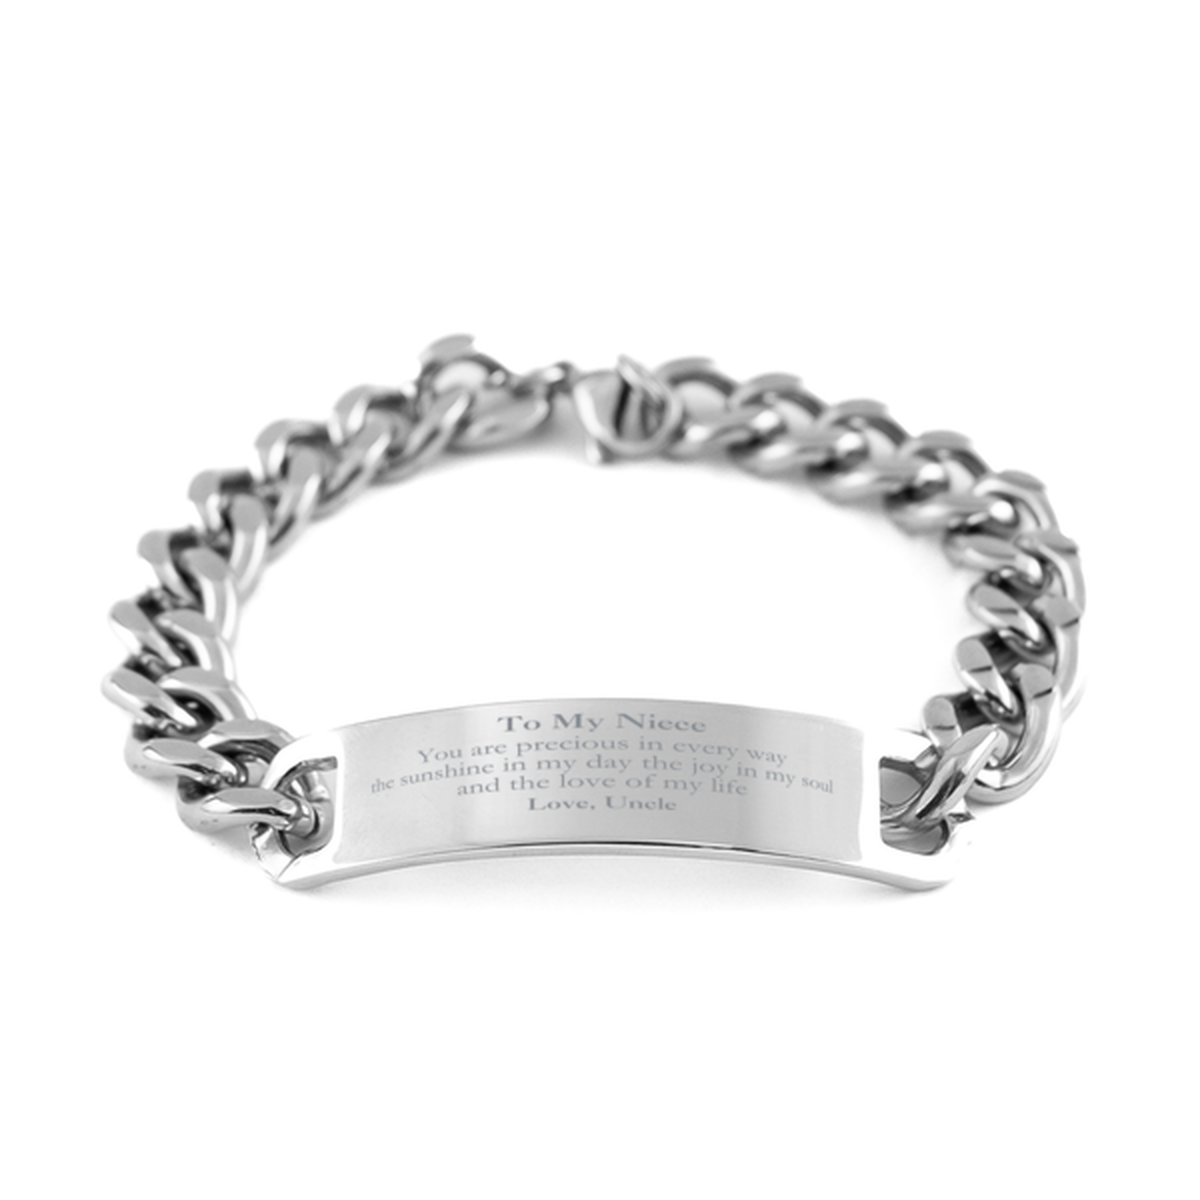 Graduation Gifts for Niece Cuban Chain Stainless Steel Bracelet Present from Uncle, Christmas Niece Birthday Gifts Niece You are precious in every way the sunshine in my day. Love, Uncle